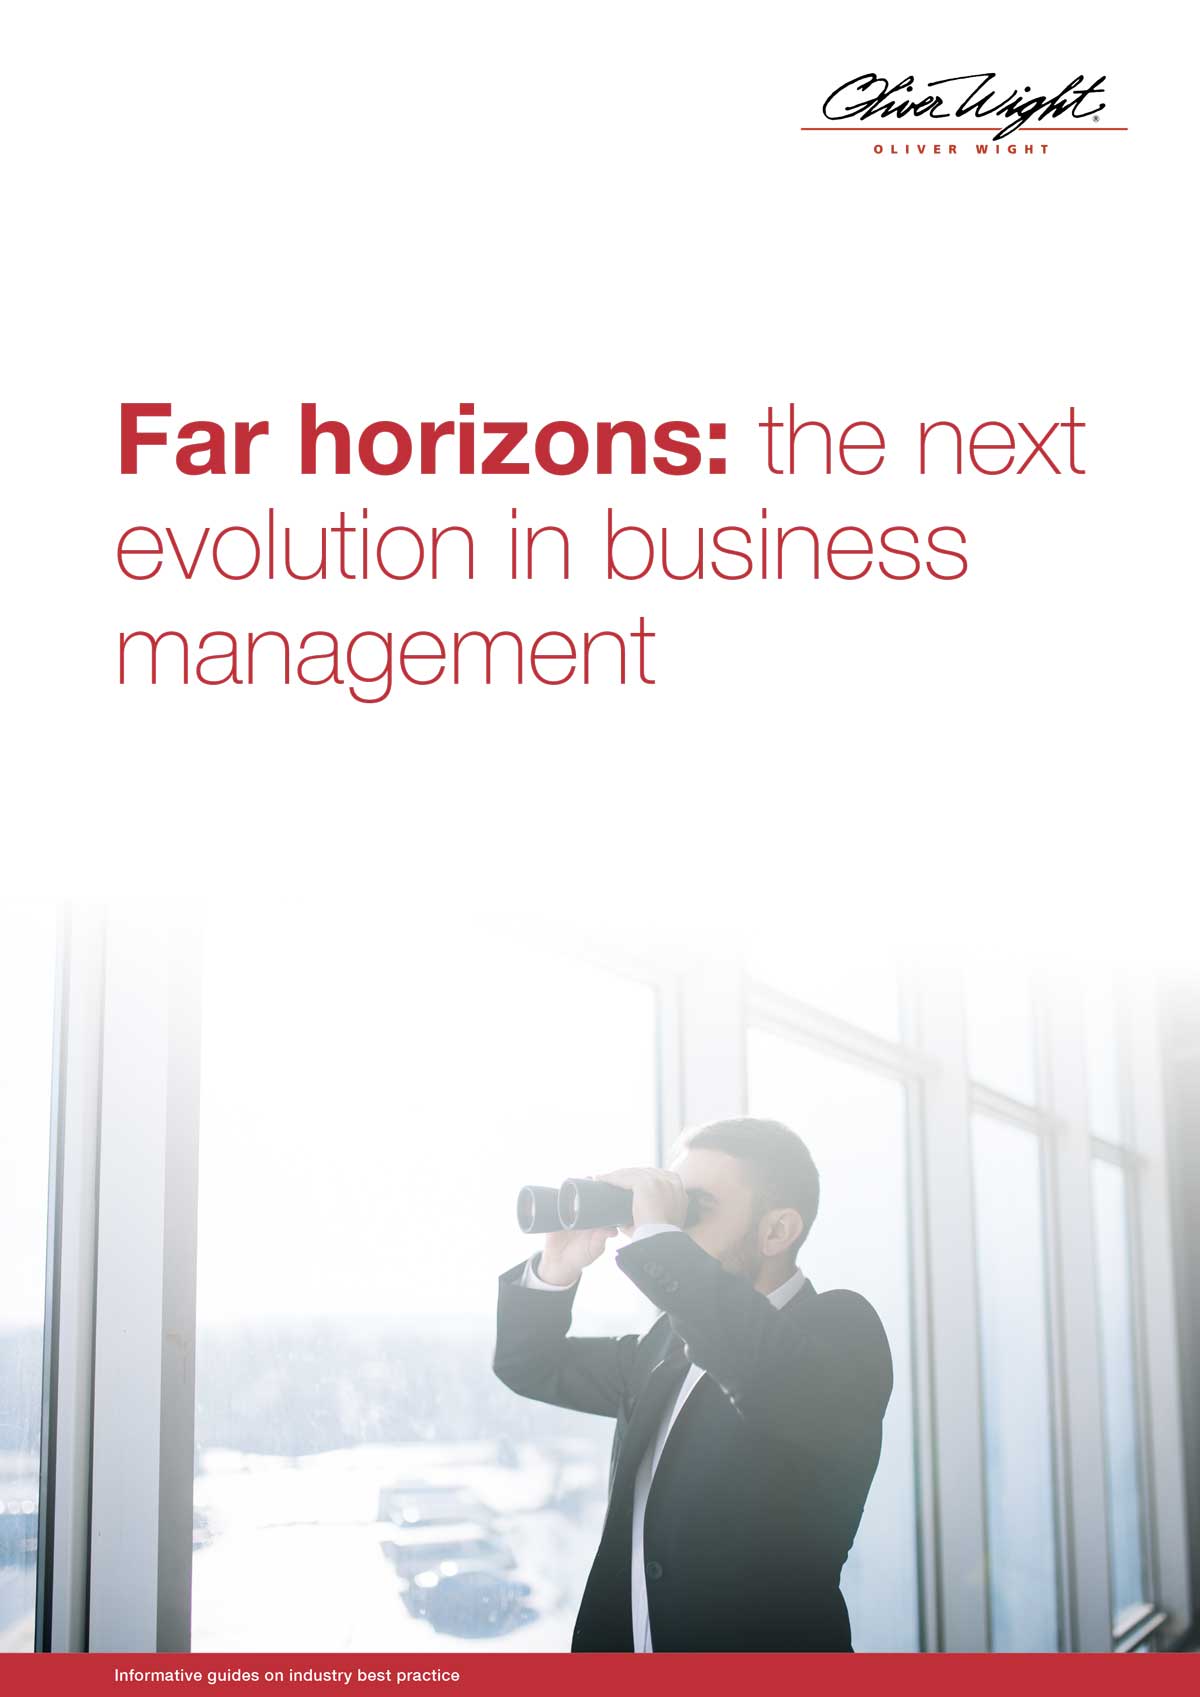 Far horizons: the next evolution in business management